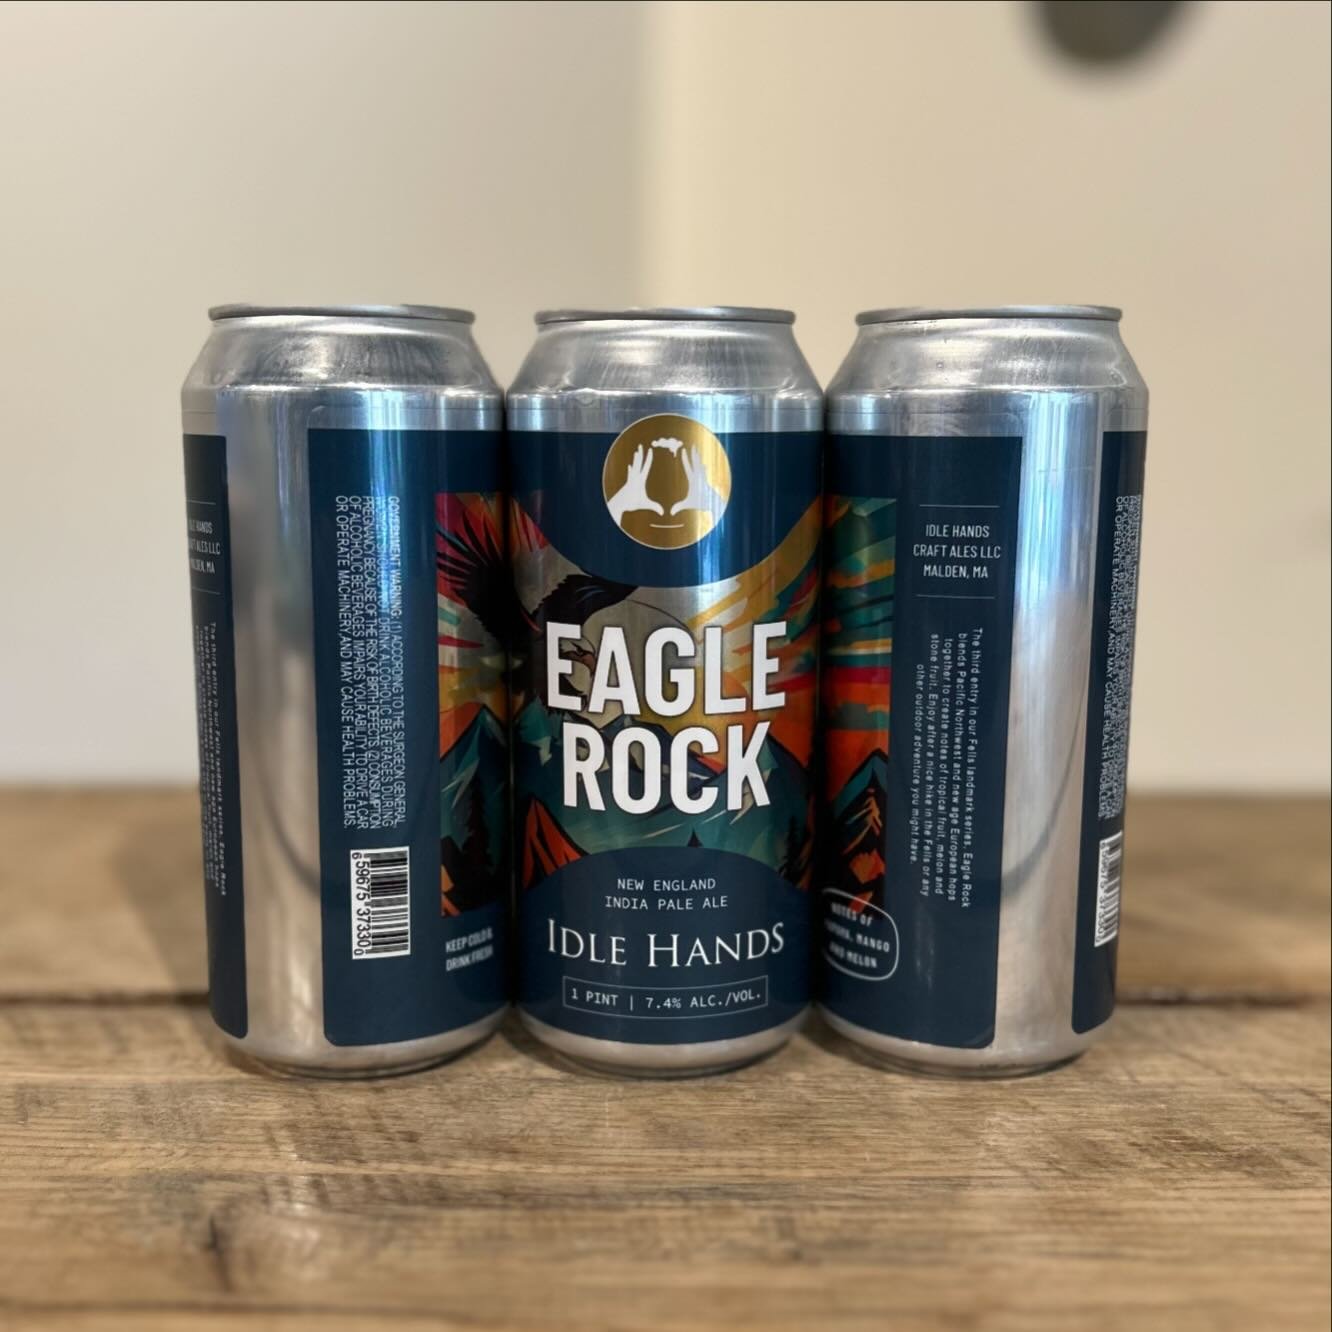 @idlehandsbeer is back in the shop this week #NowAvailable #SudburyCraftBeer #DrinkLocal
&mdash;
The third entry in our Fells landmark series, Eagle Rock blends Pacific Northwest and new age European hops together to create notes of tropical fruit, m